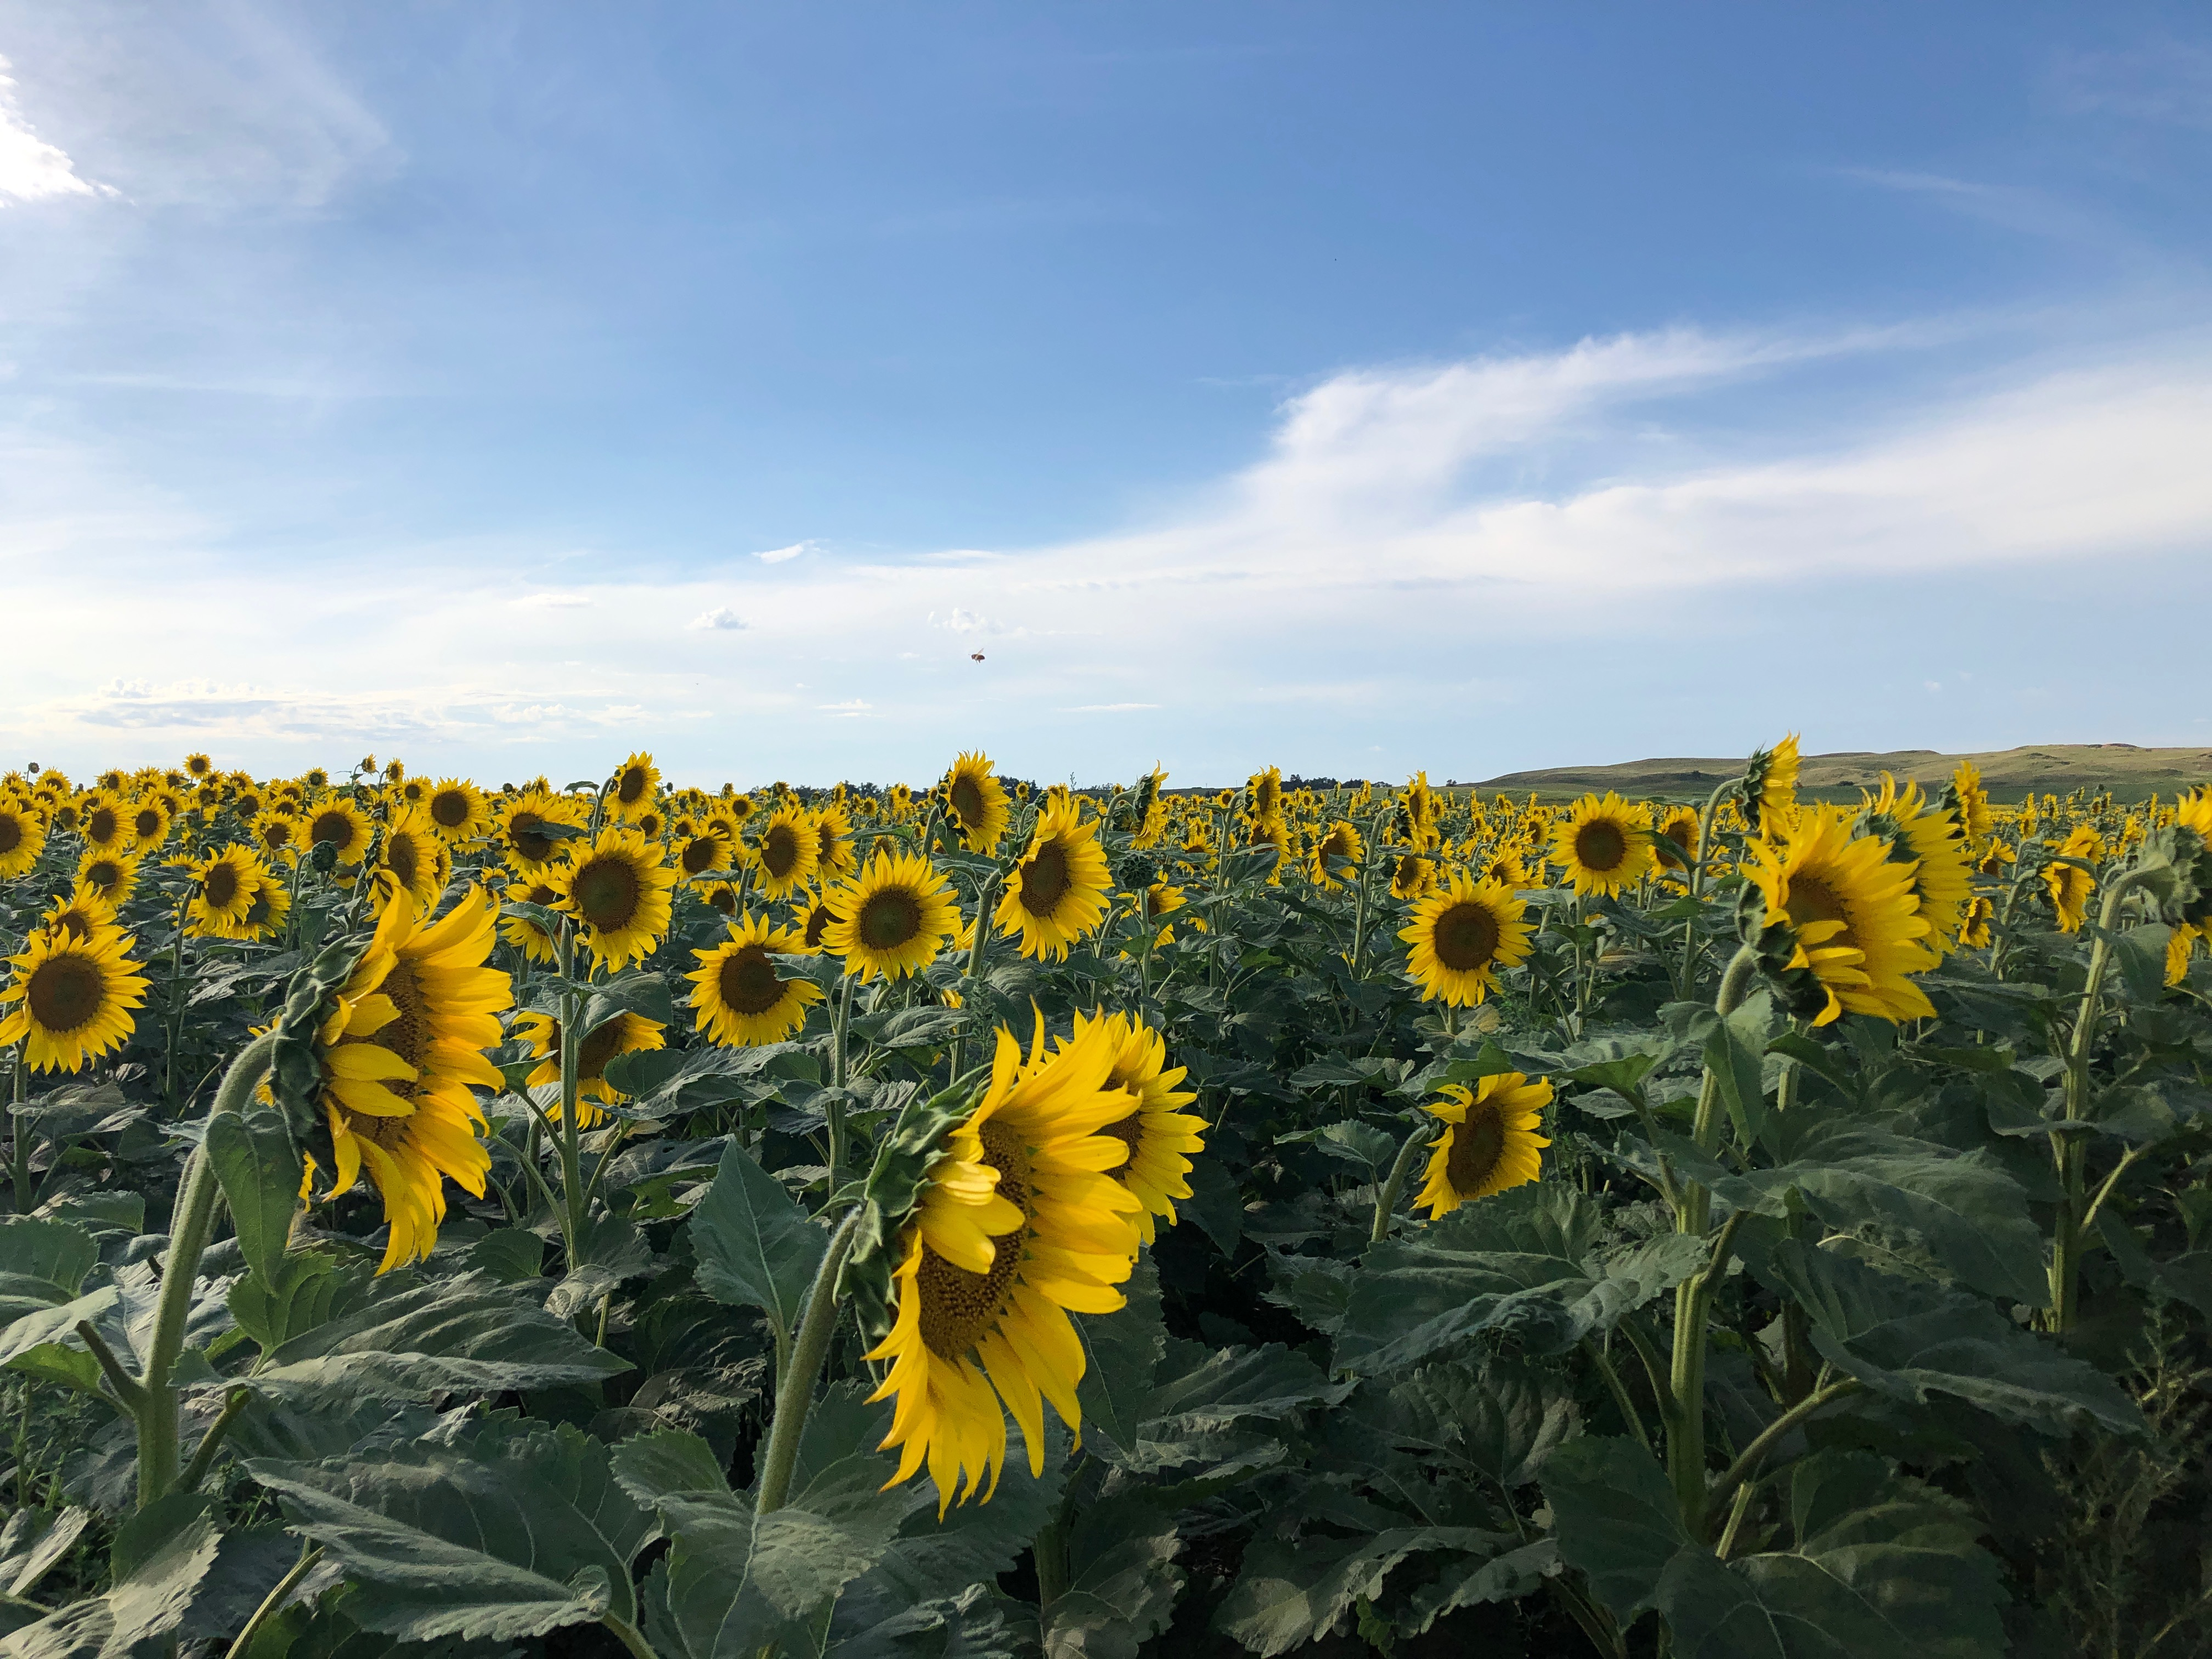 Dry soil conditions and good prices have more producers interested in growing sunflowers